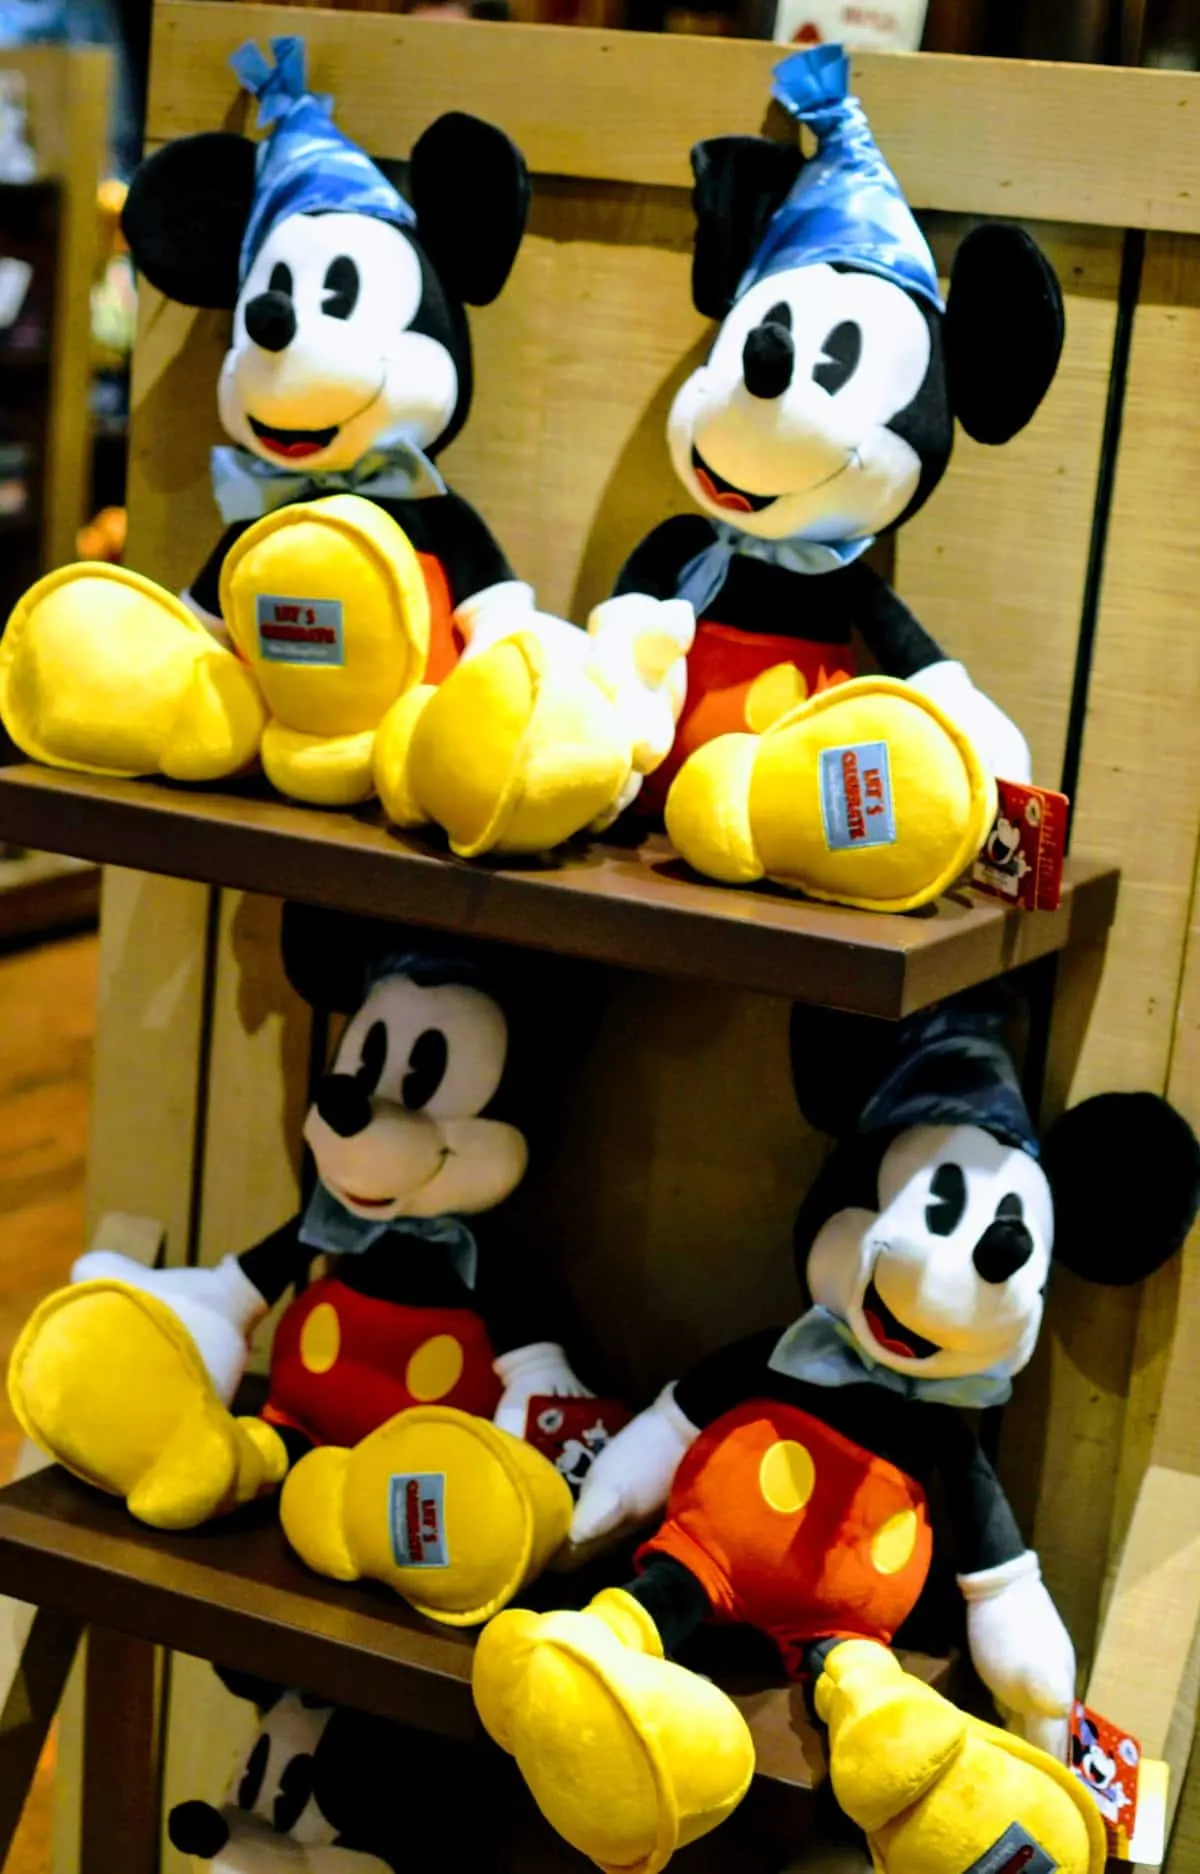 Gift ideas for Disney World-bound families